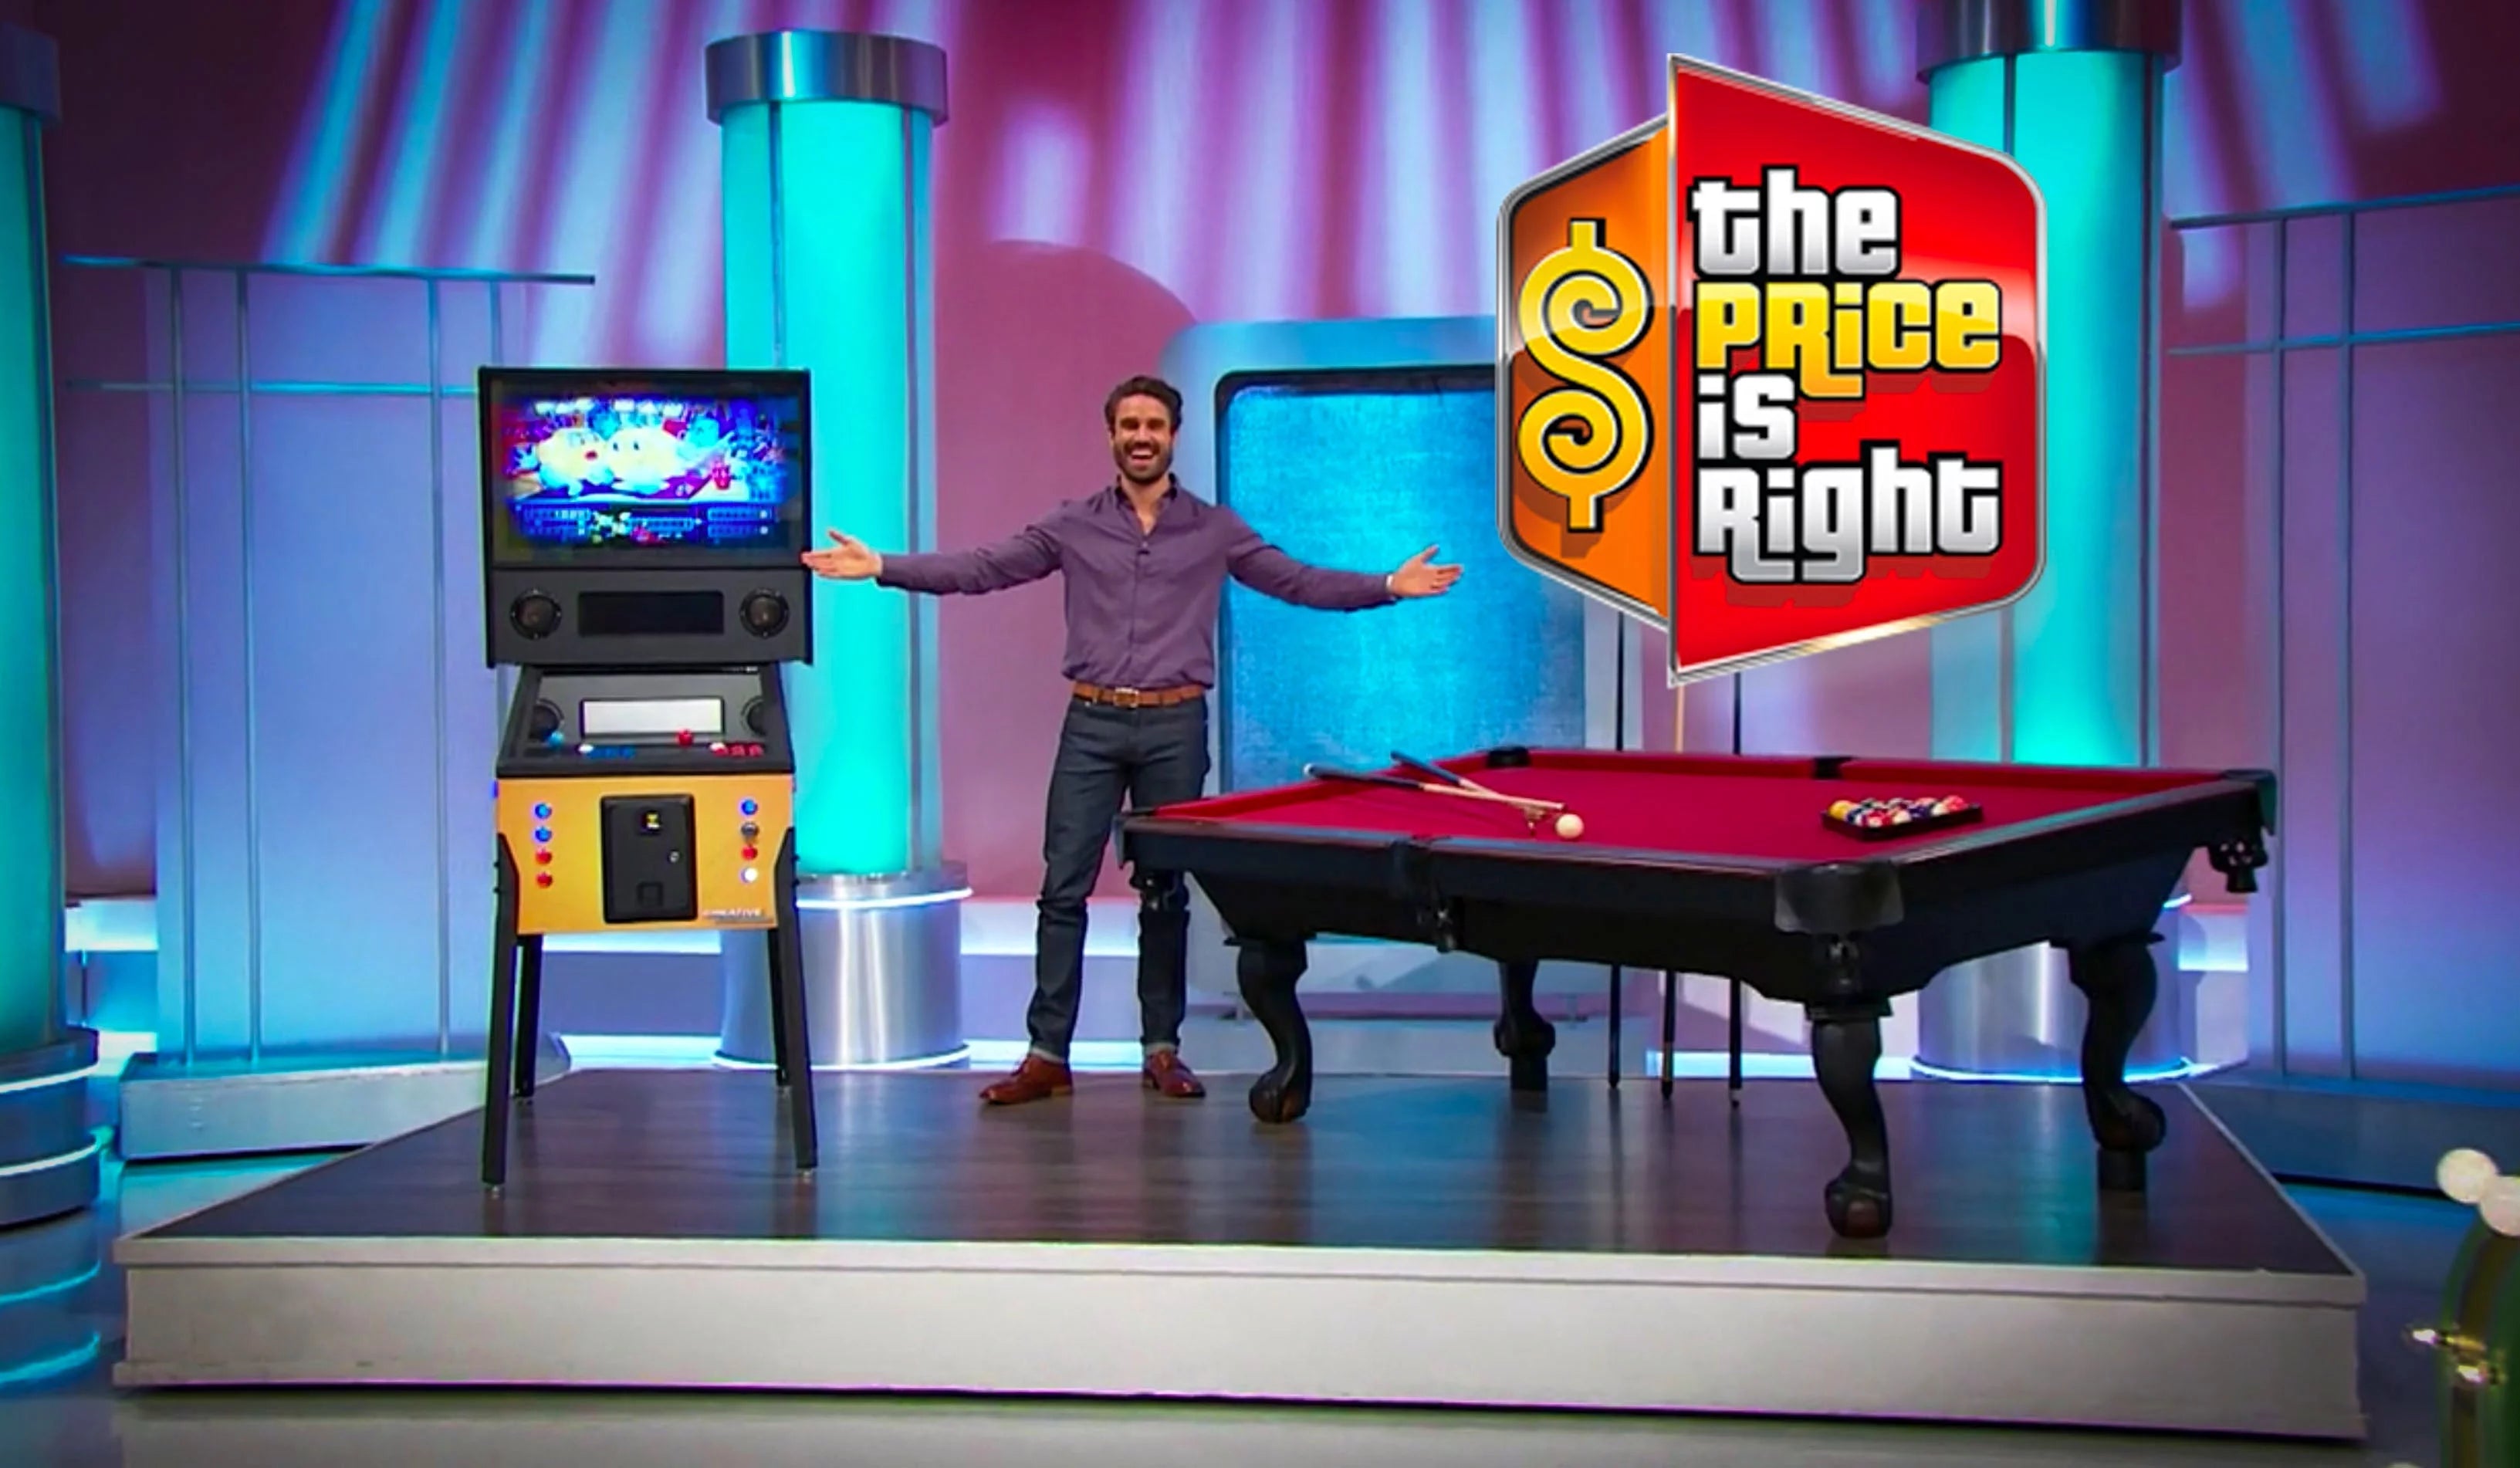 Creative Arcades Featured in The Price is Right!